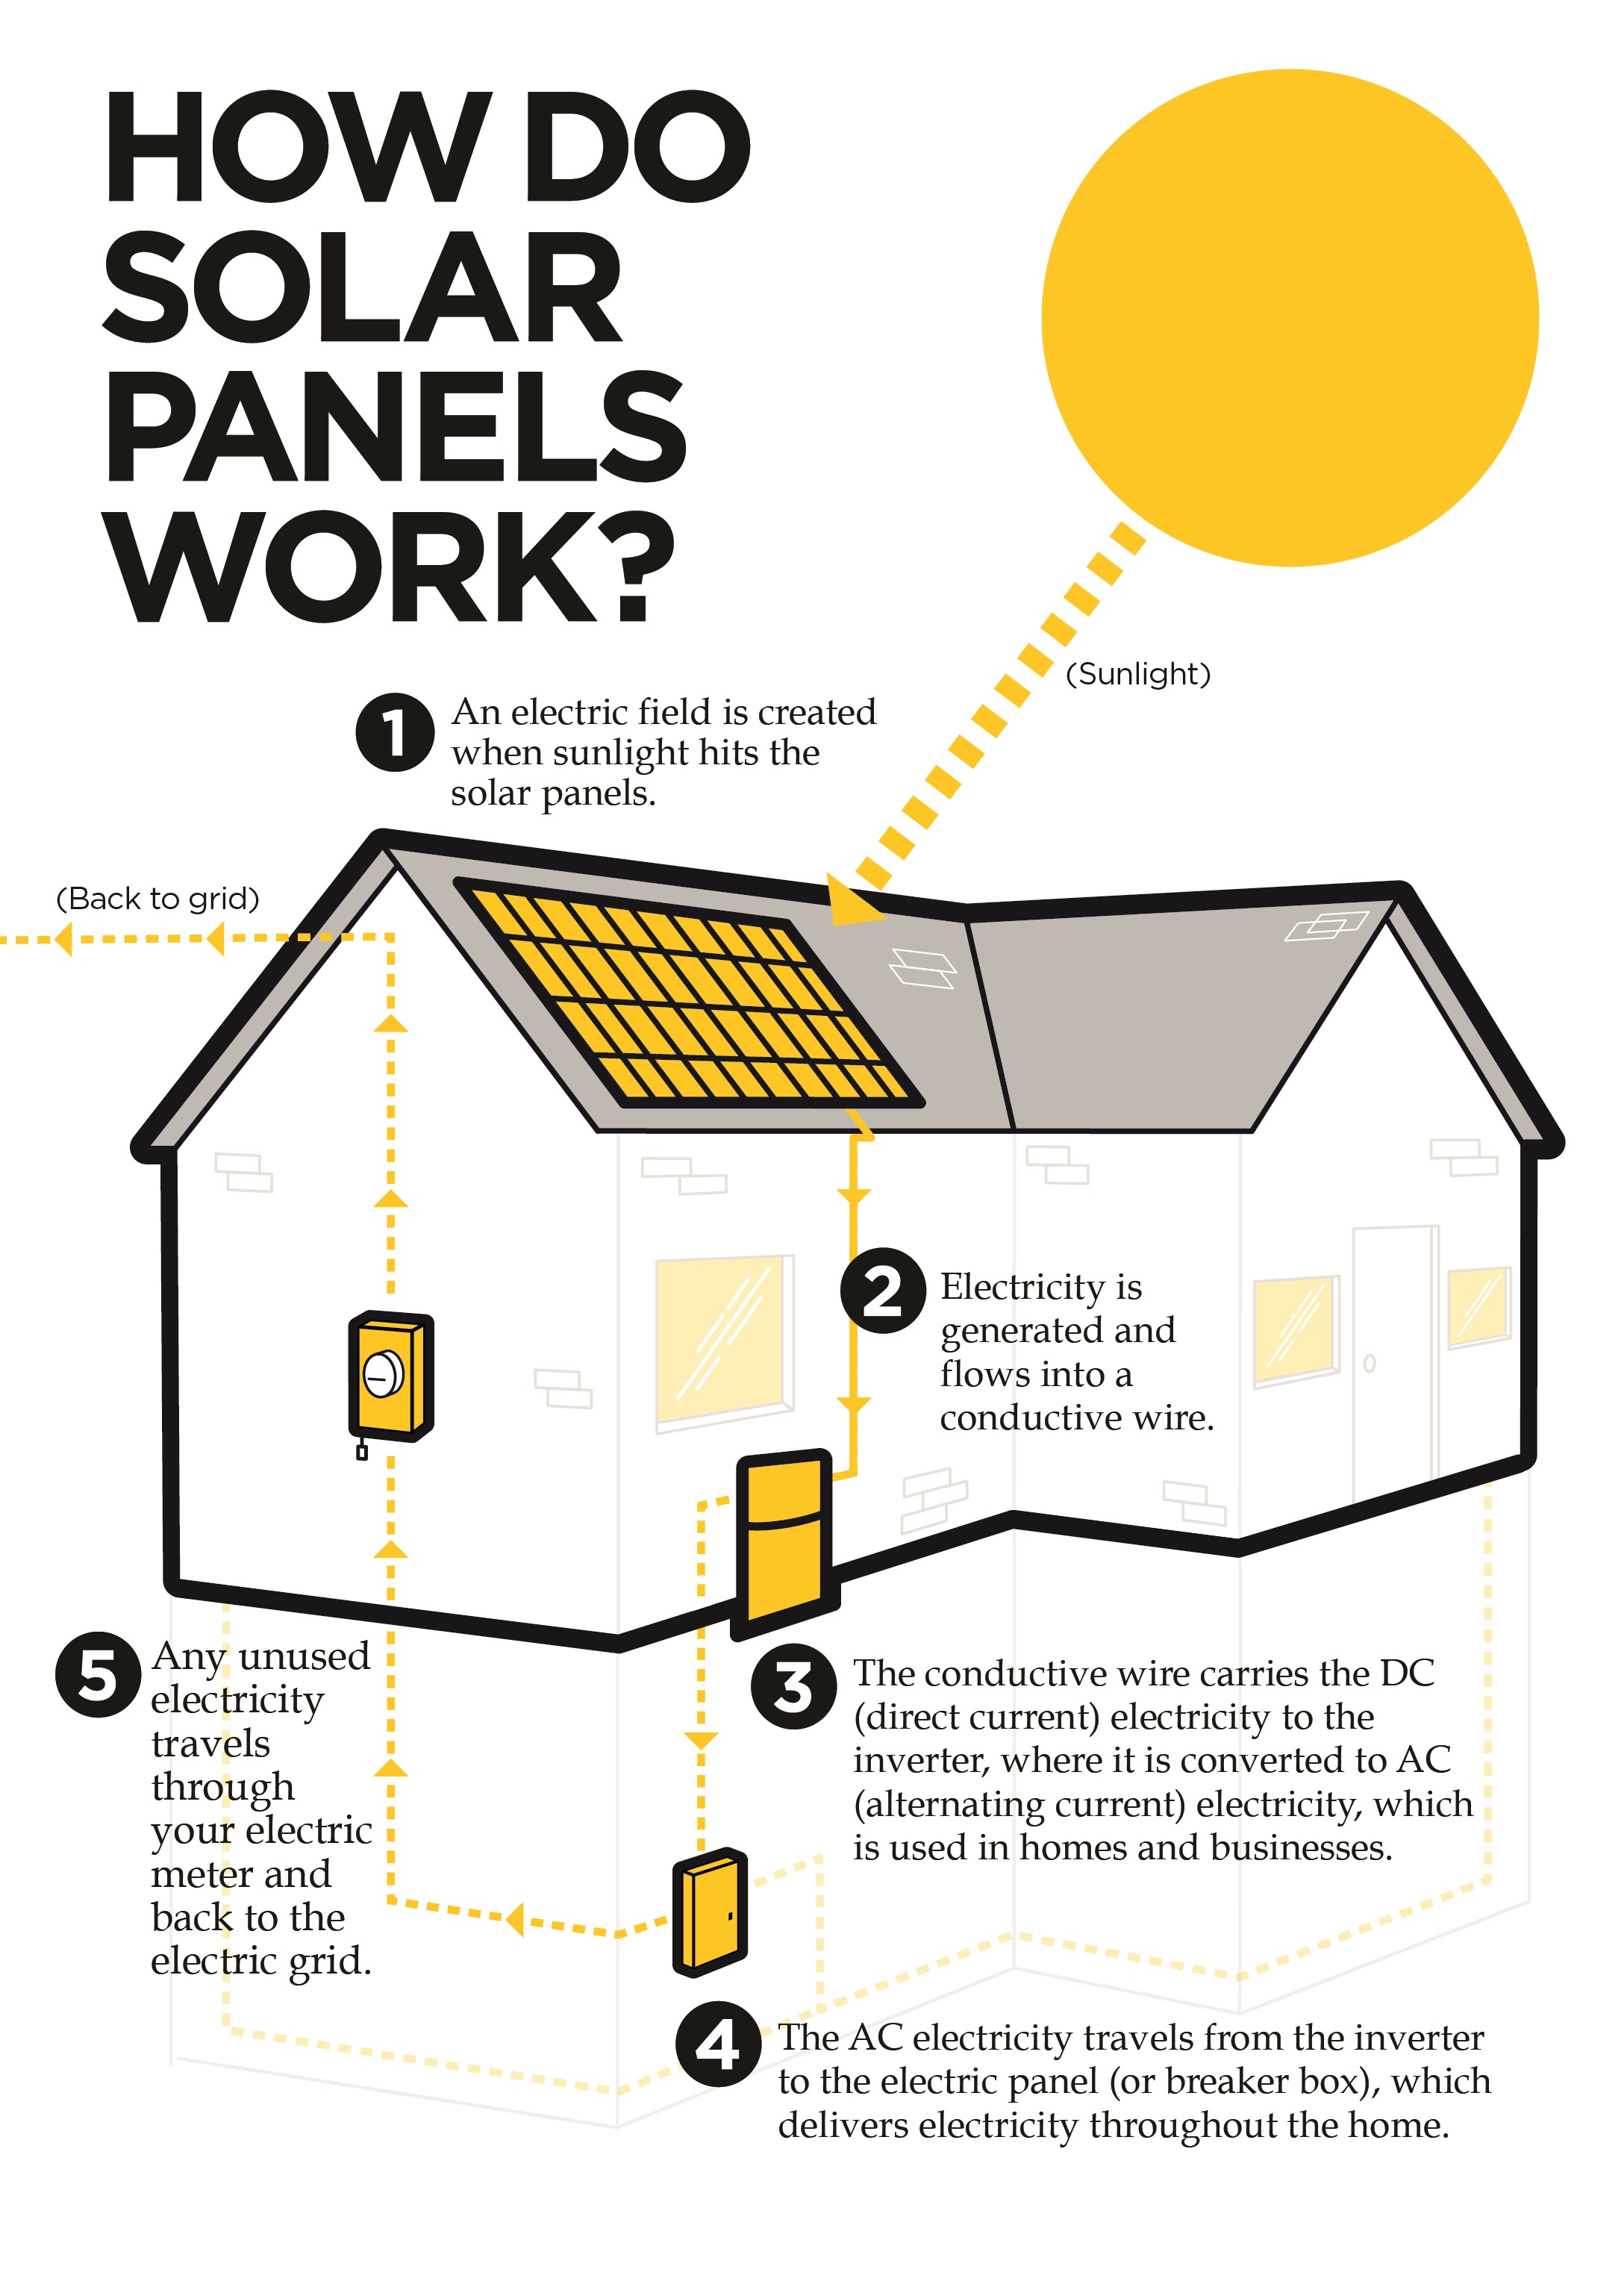 a-glimpse-into-how-solar-panels-work